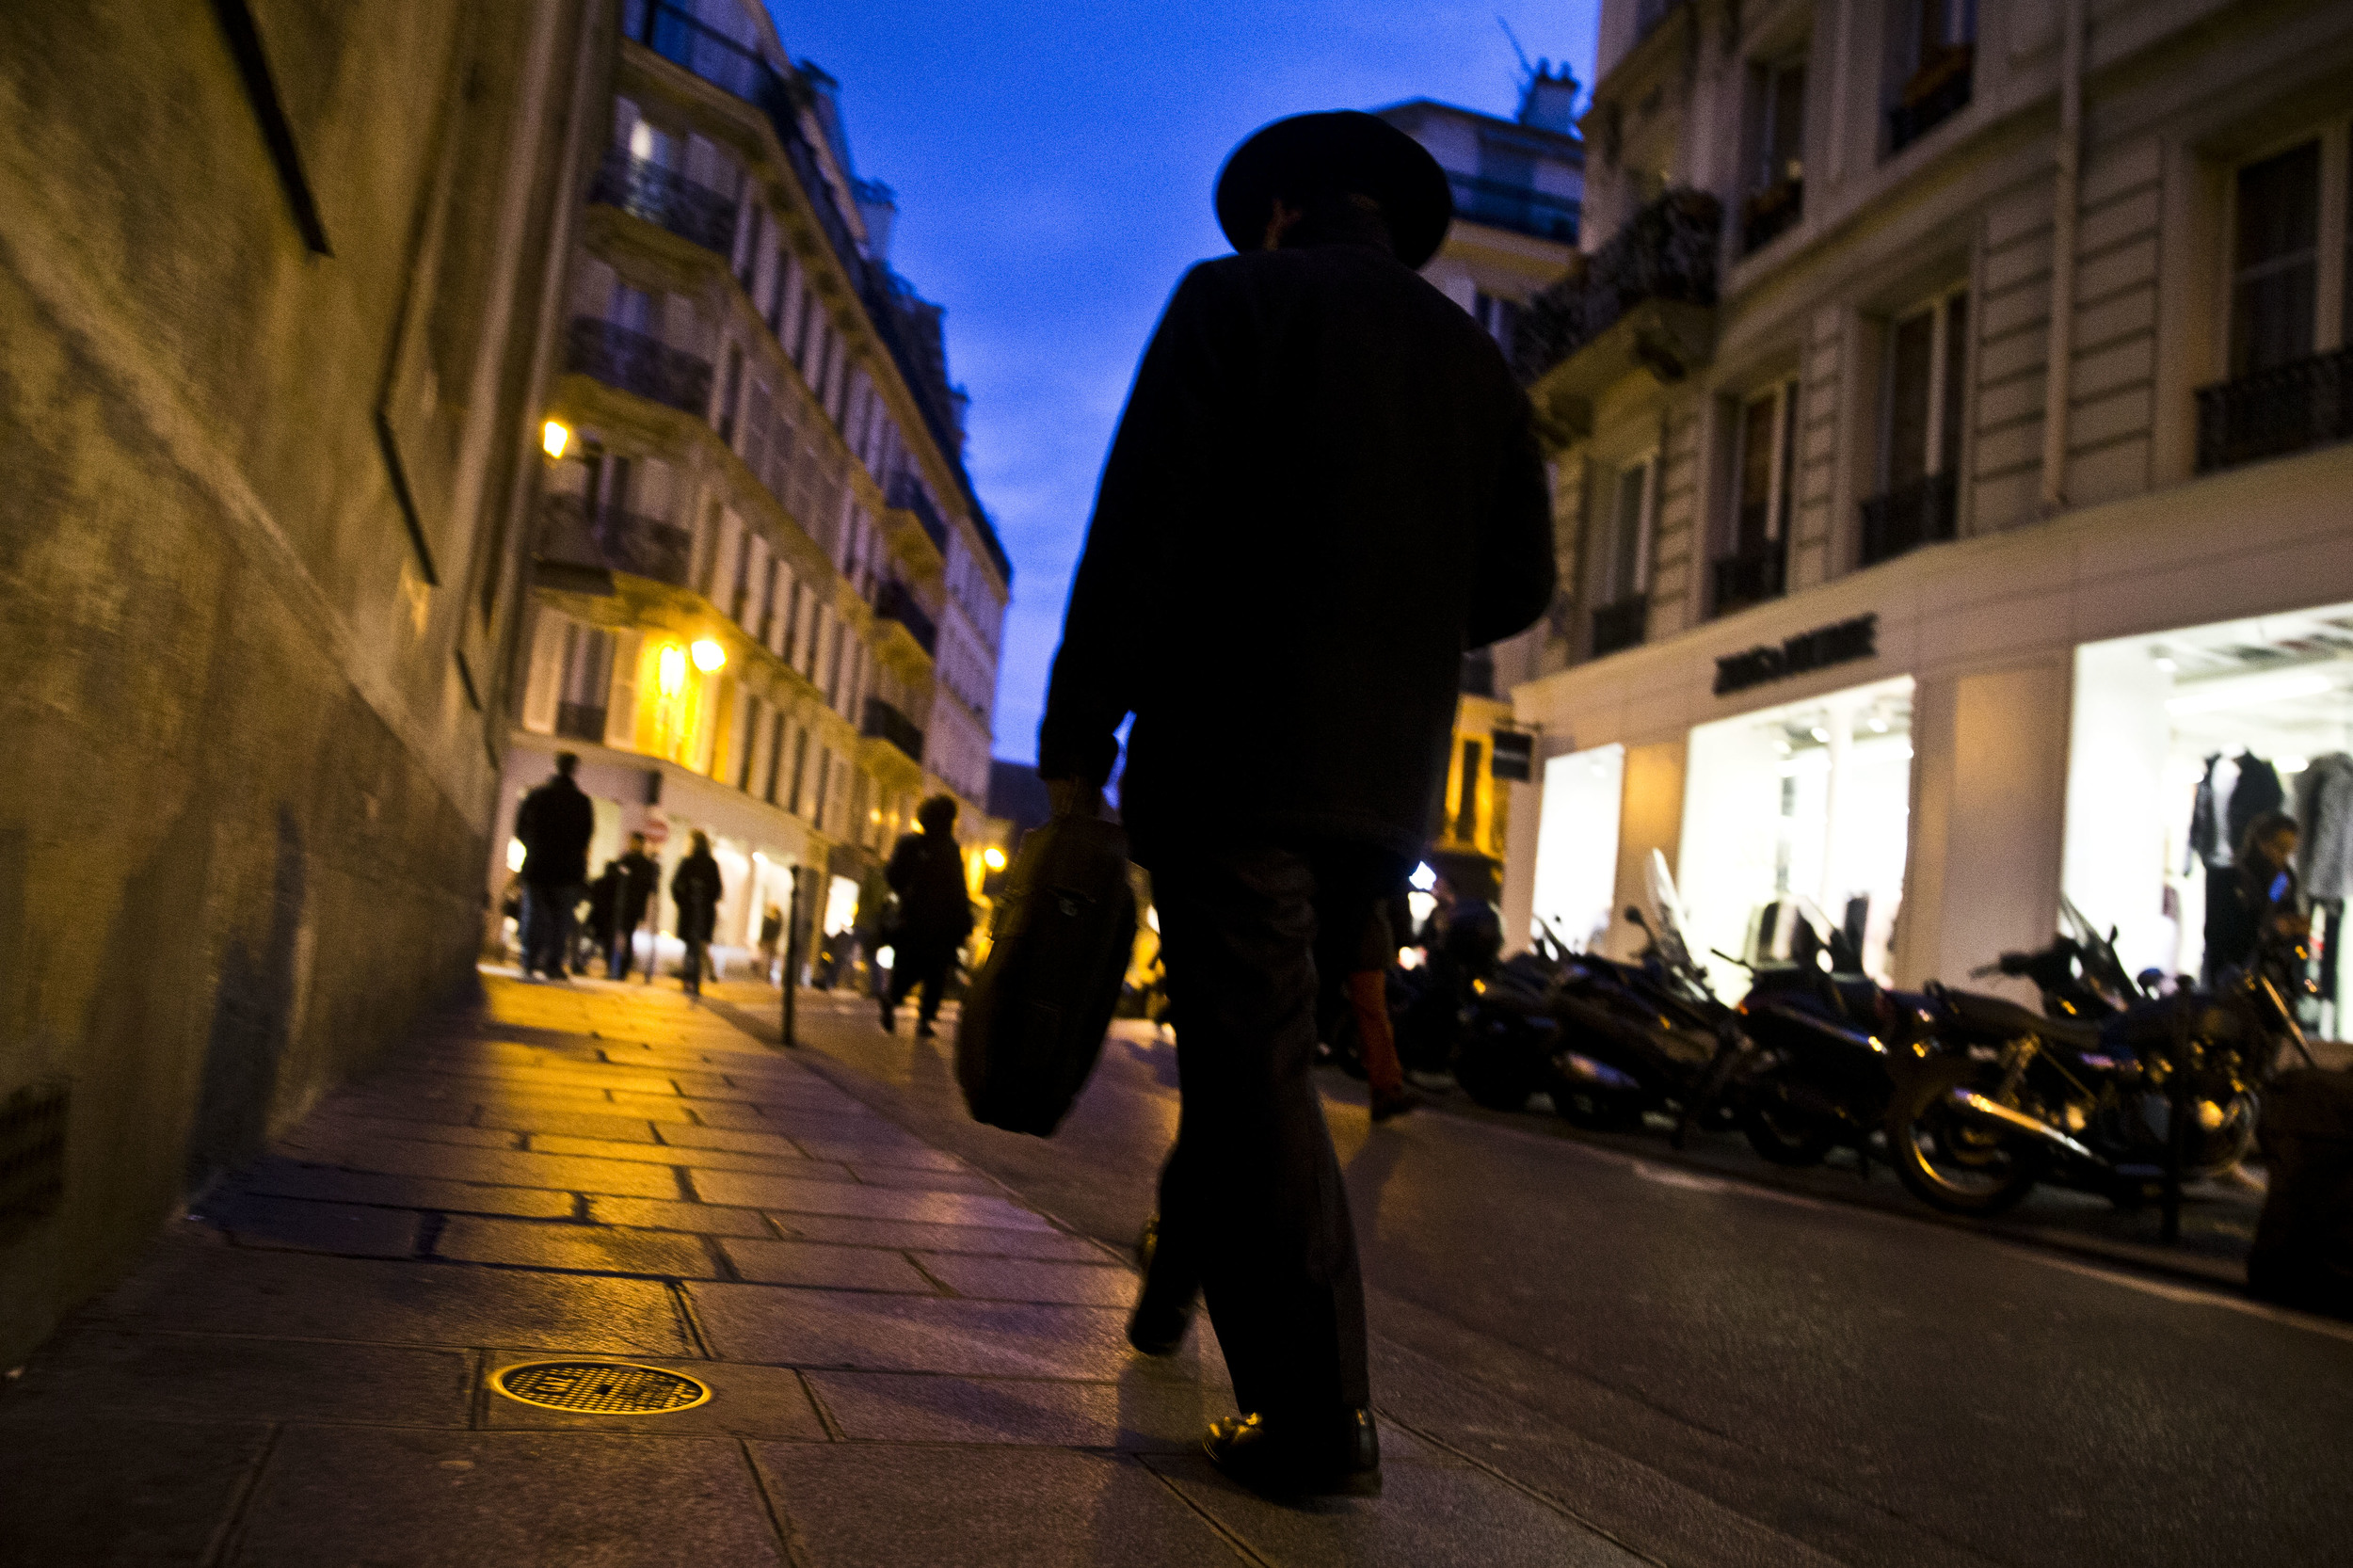 An orthodox jew walks in Paris district Marais that was taken under guard after Charlie Hebdo shooting. January 12, 2015